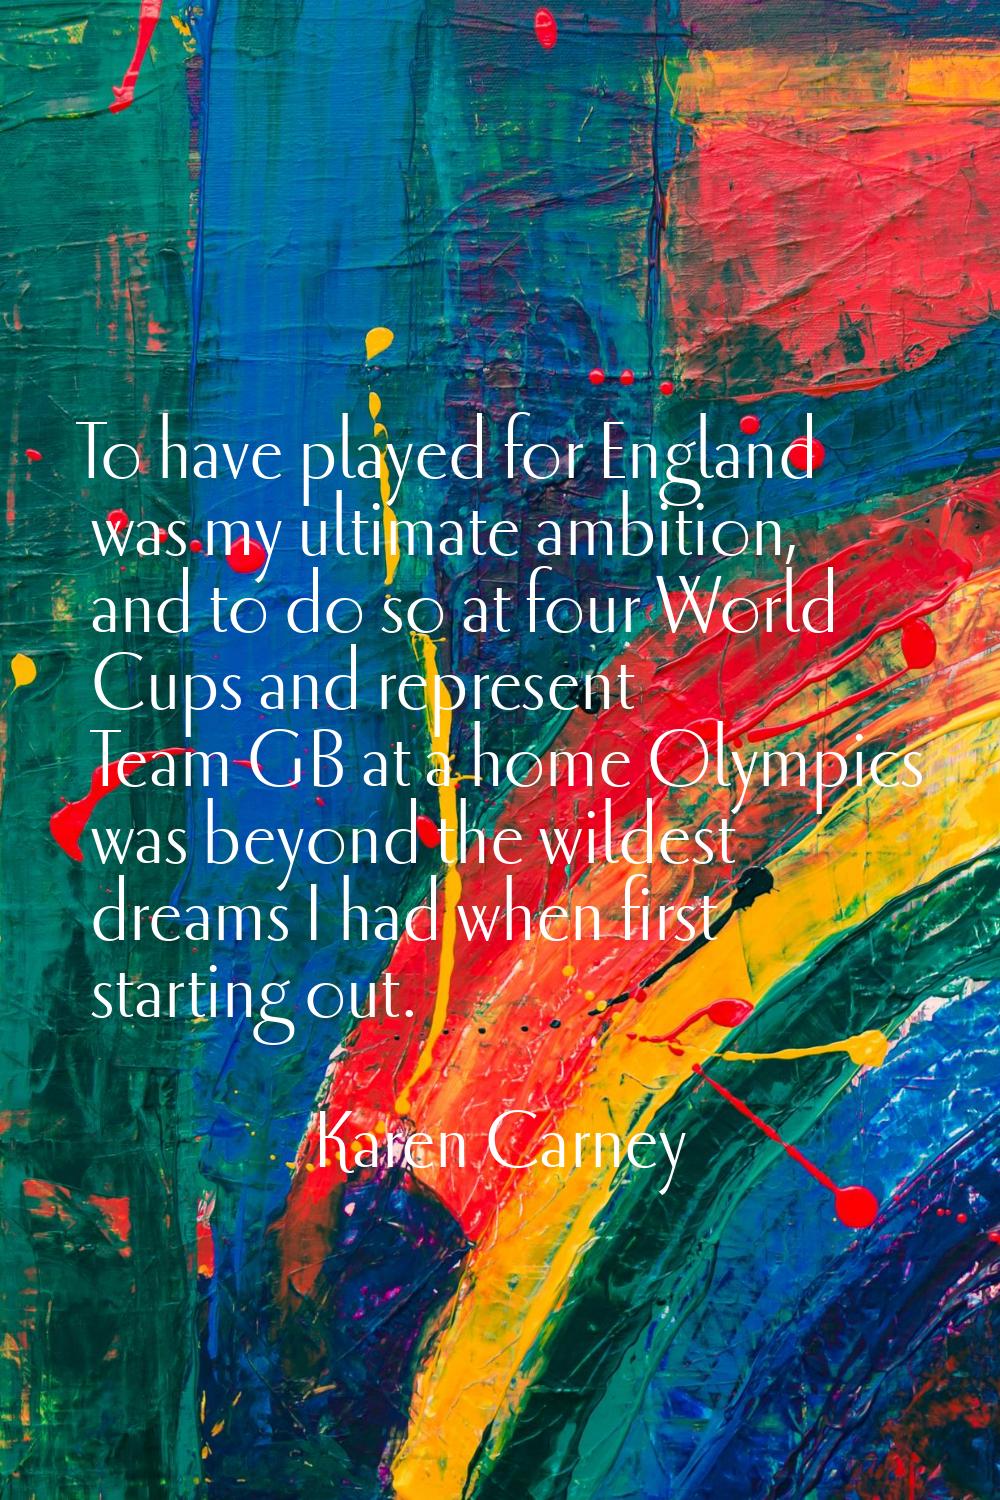 To have played for England was my ultimate ambition, and to do so at four World Cups and represent 